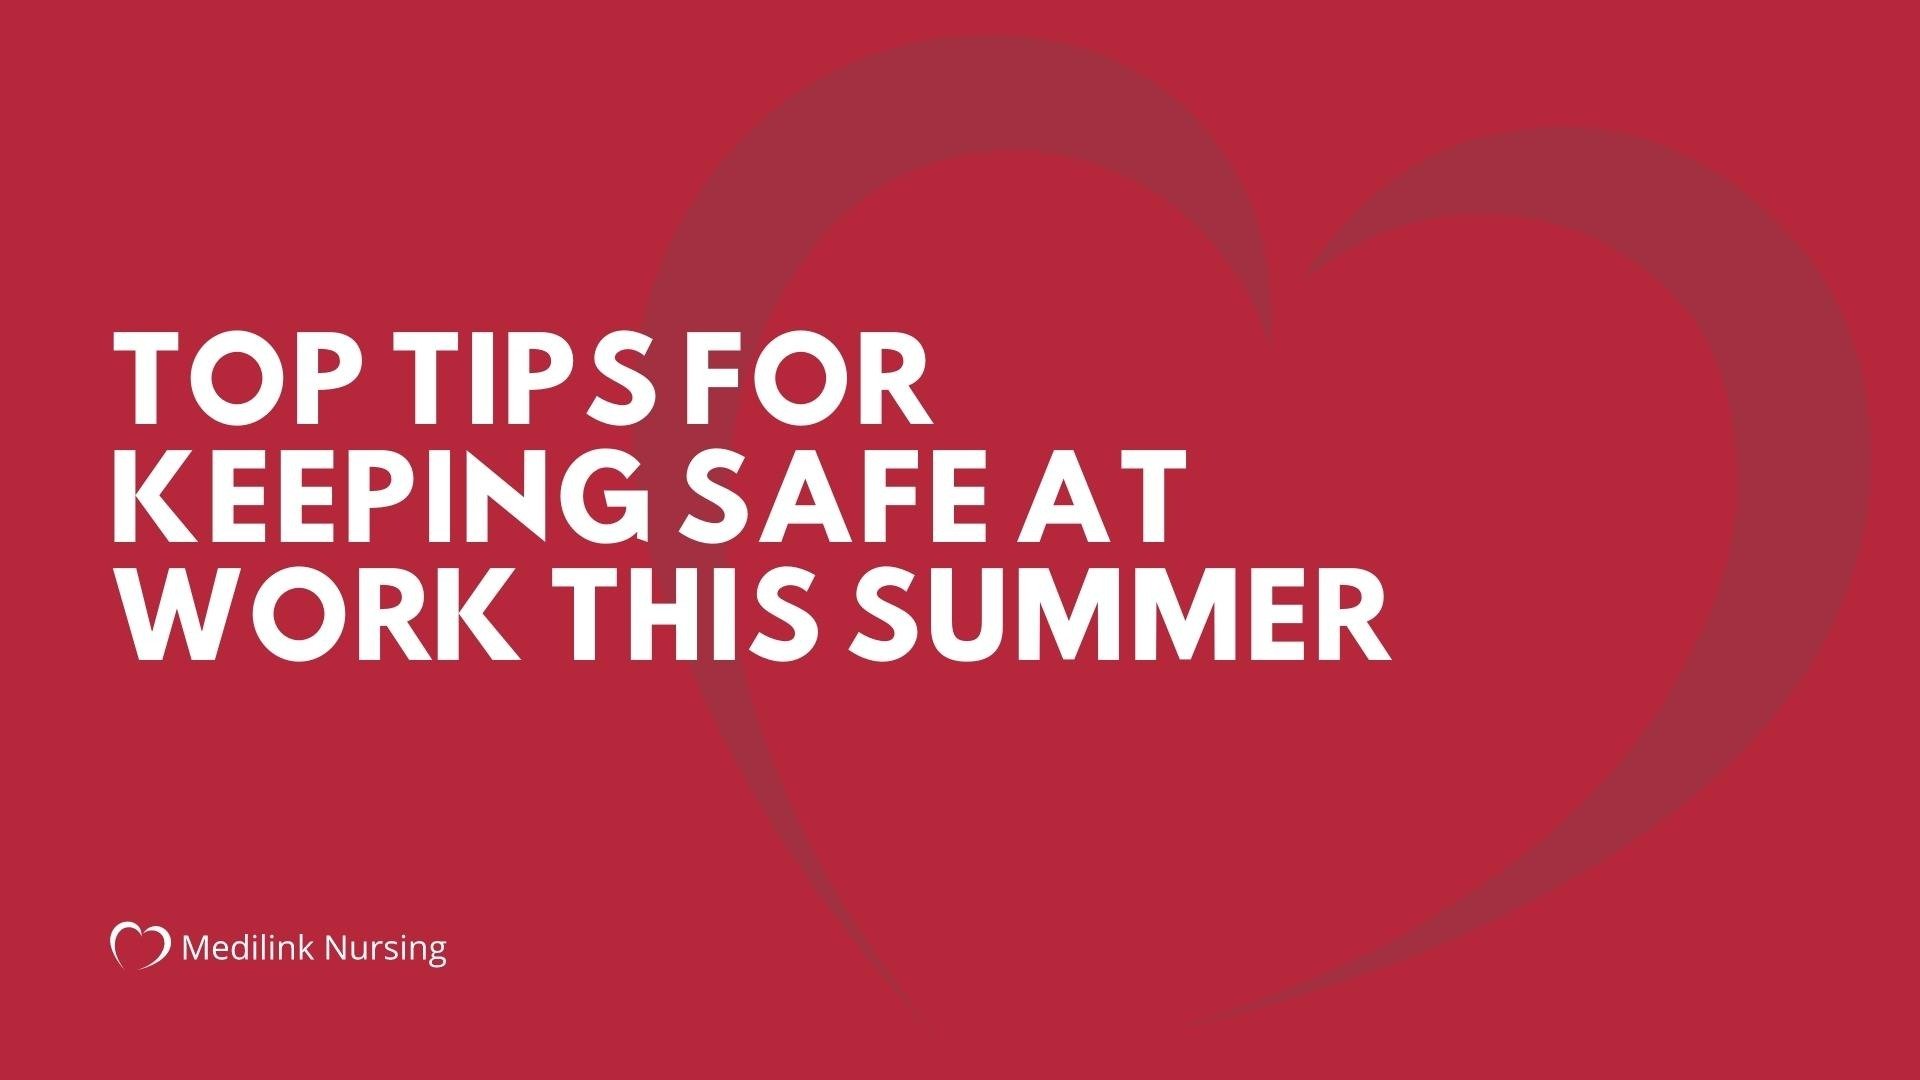 5 Top Tips for Keeping Safe at Work This Summer